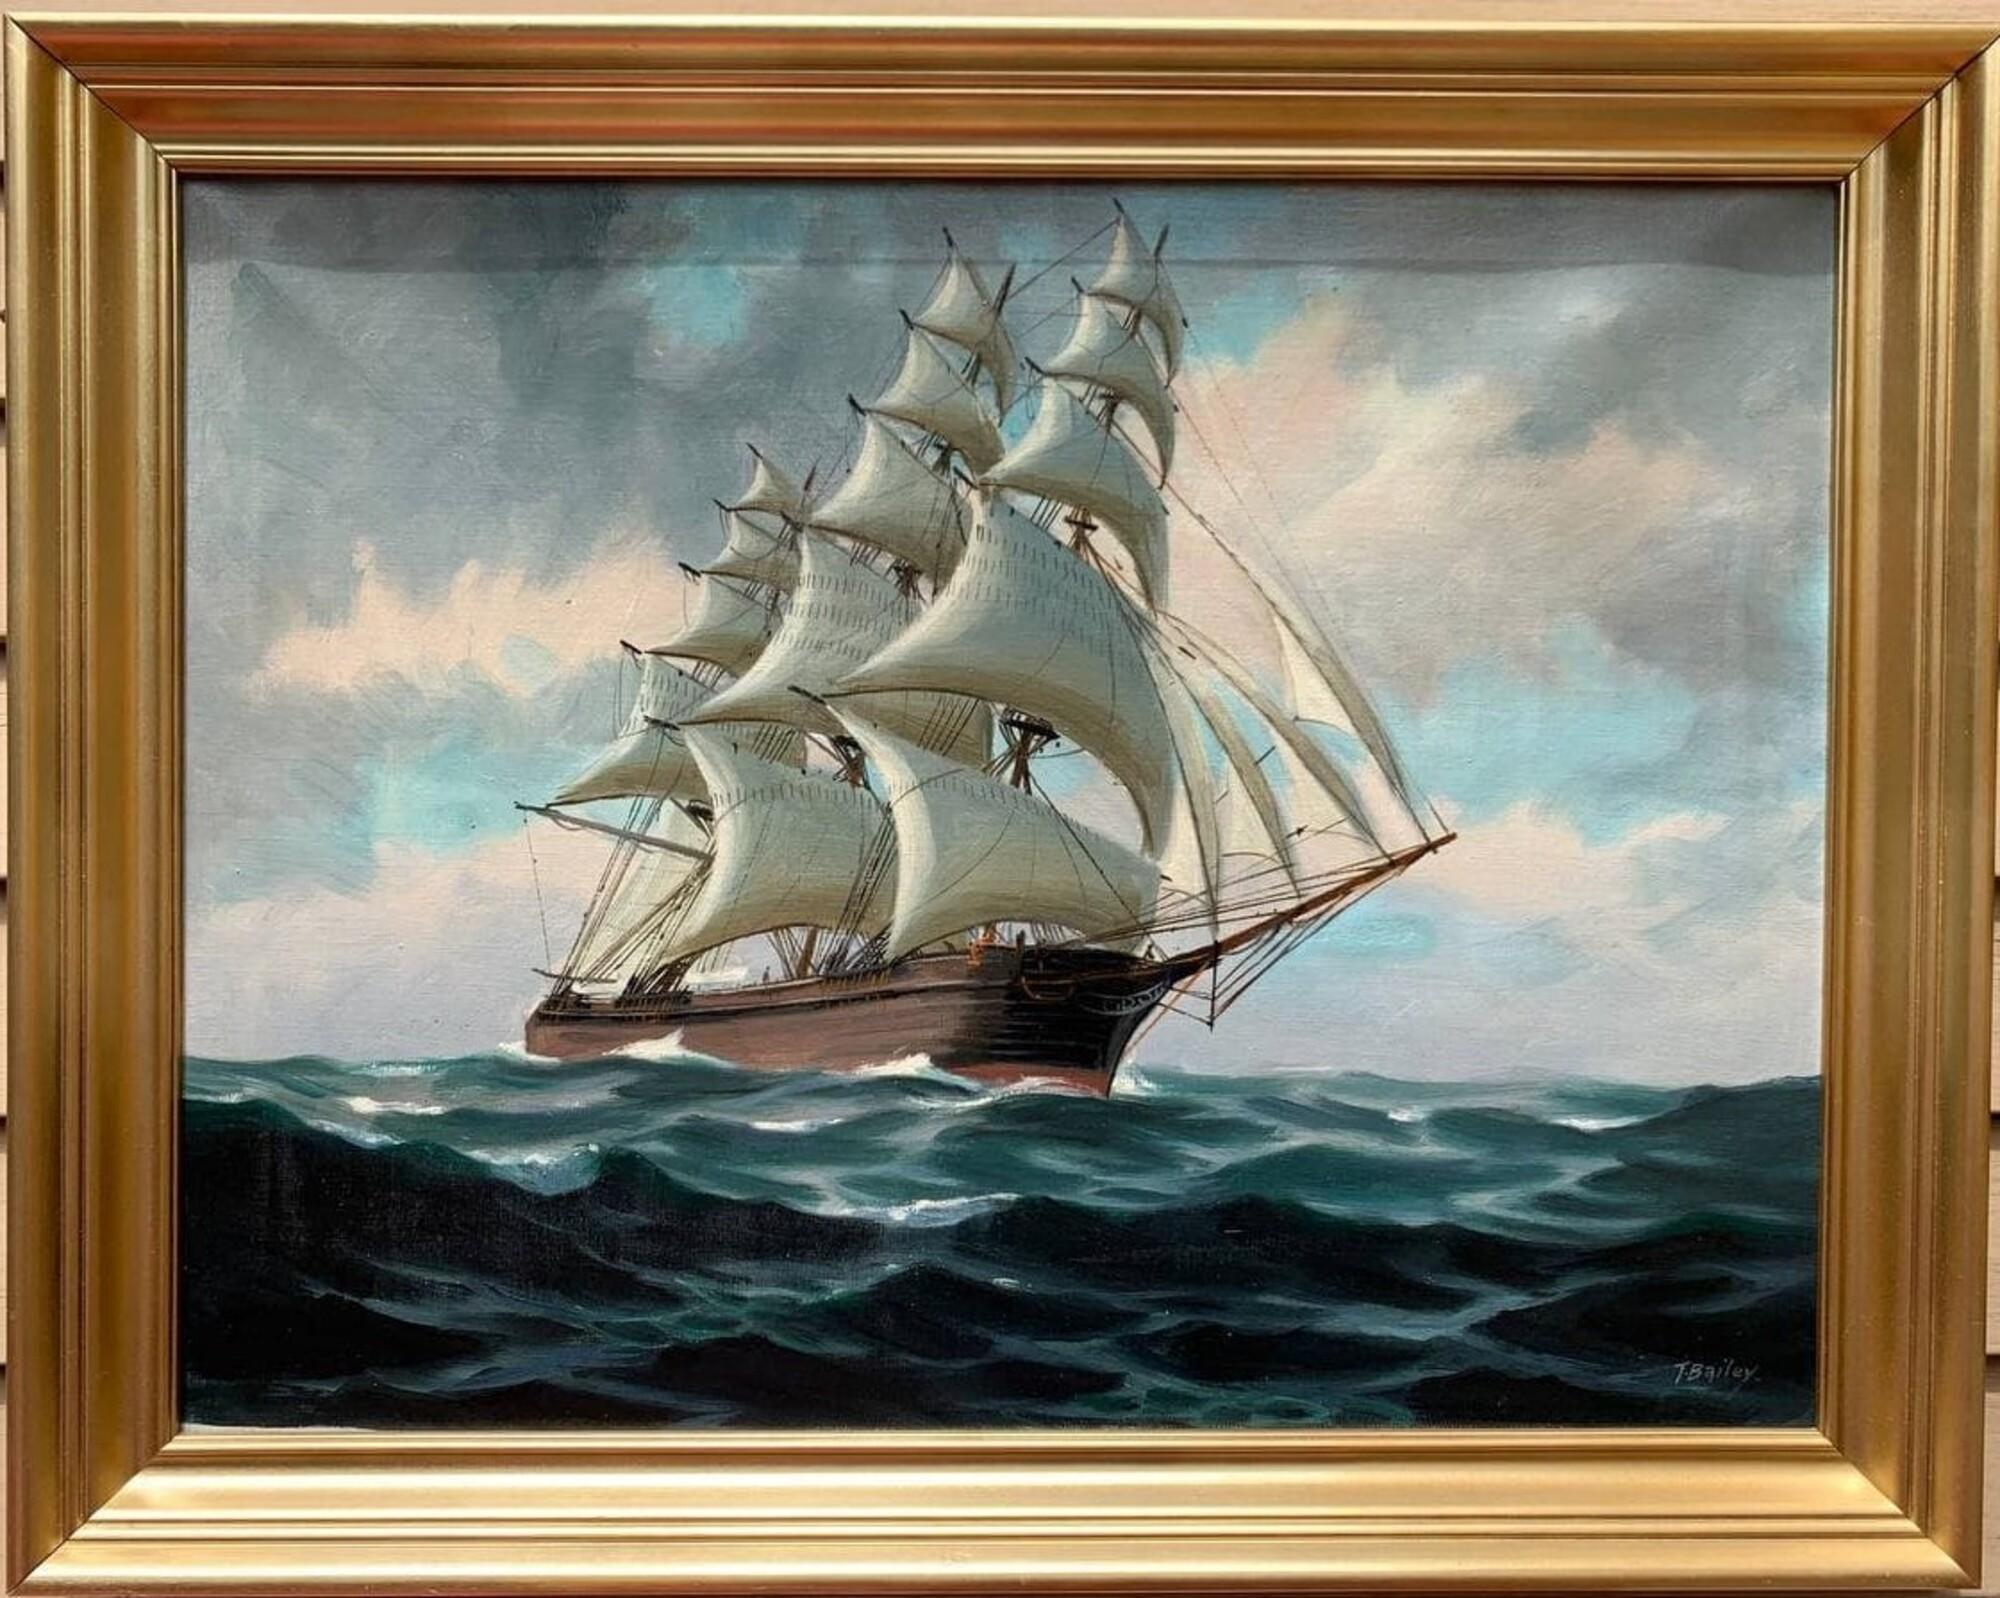 T. Bailey Landscape Painting - Large Antique T.BAILEY Original Large Oil Painting on canvas Ship on the Ocean